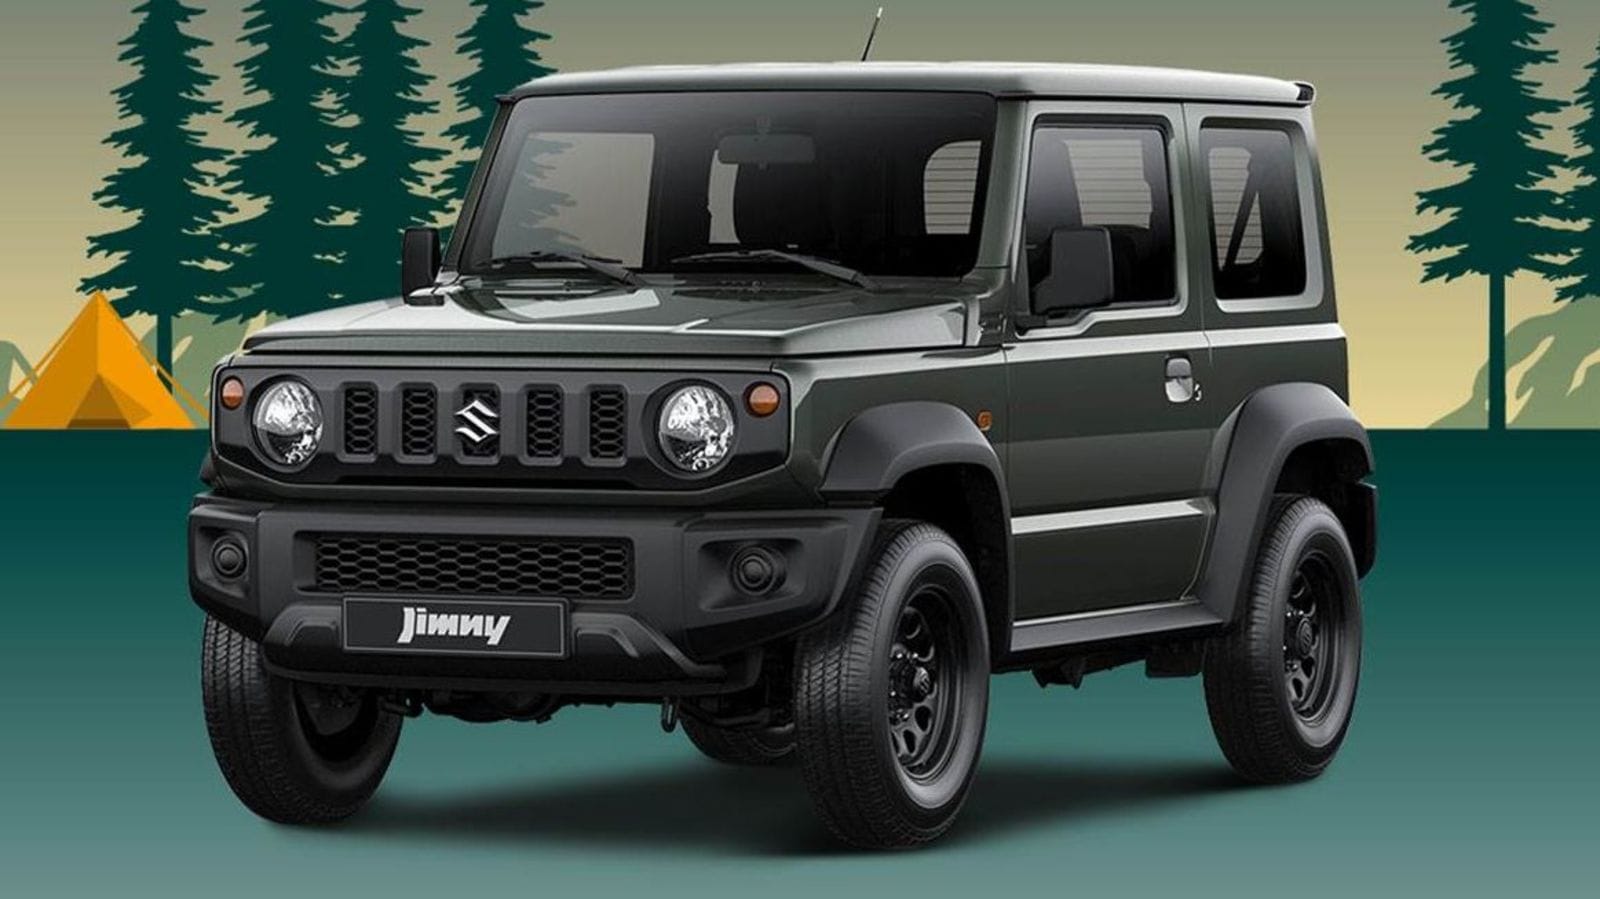 2022 Suzuki Jimny Lite announced with fewer features and lower